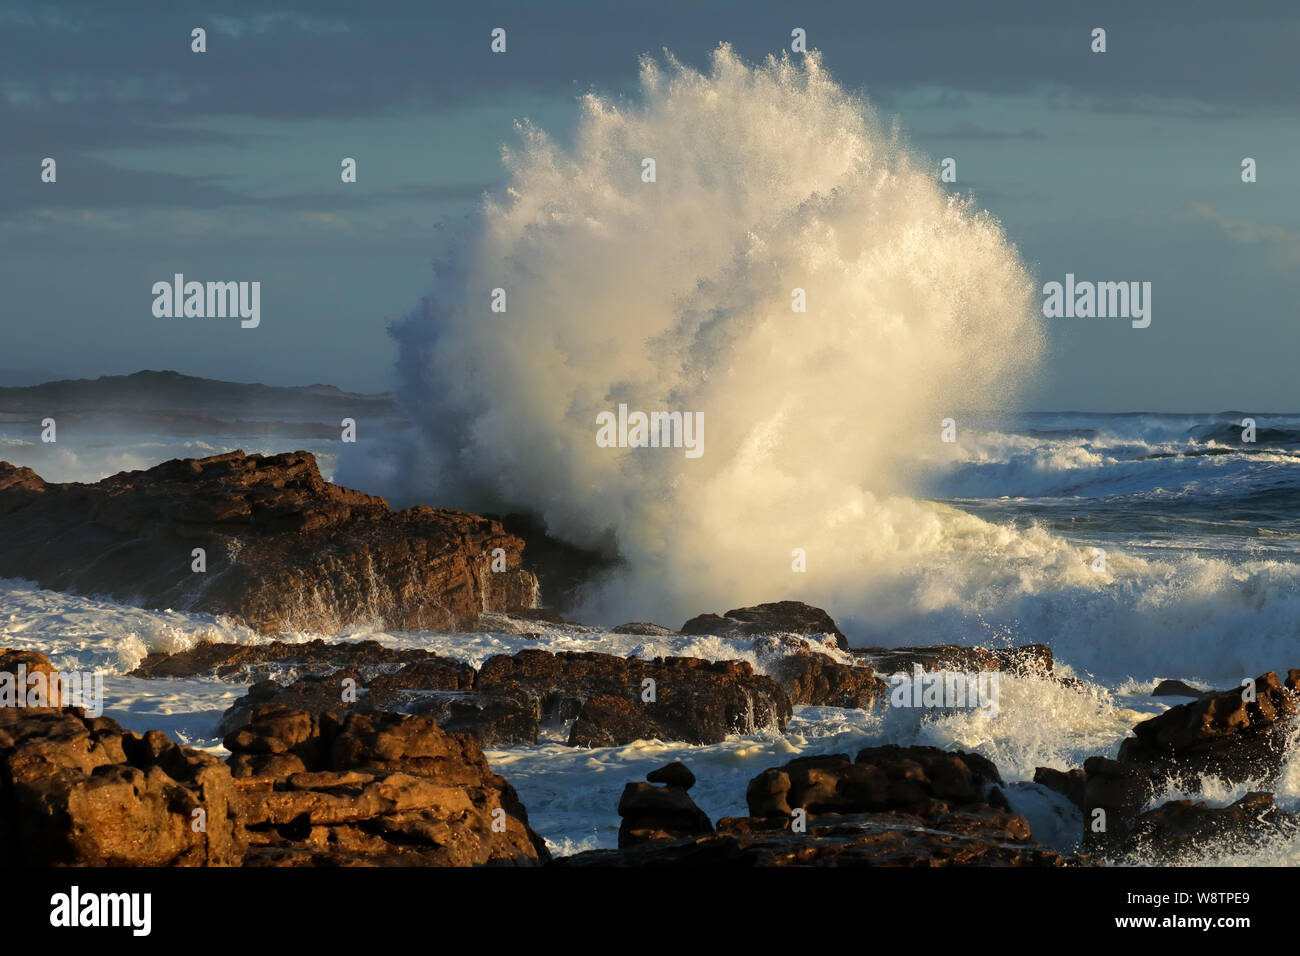 Seascape with large breaking wave on coastal rocks, South Africa Stock Photo